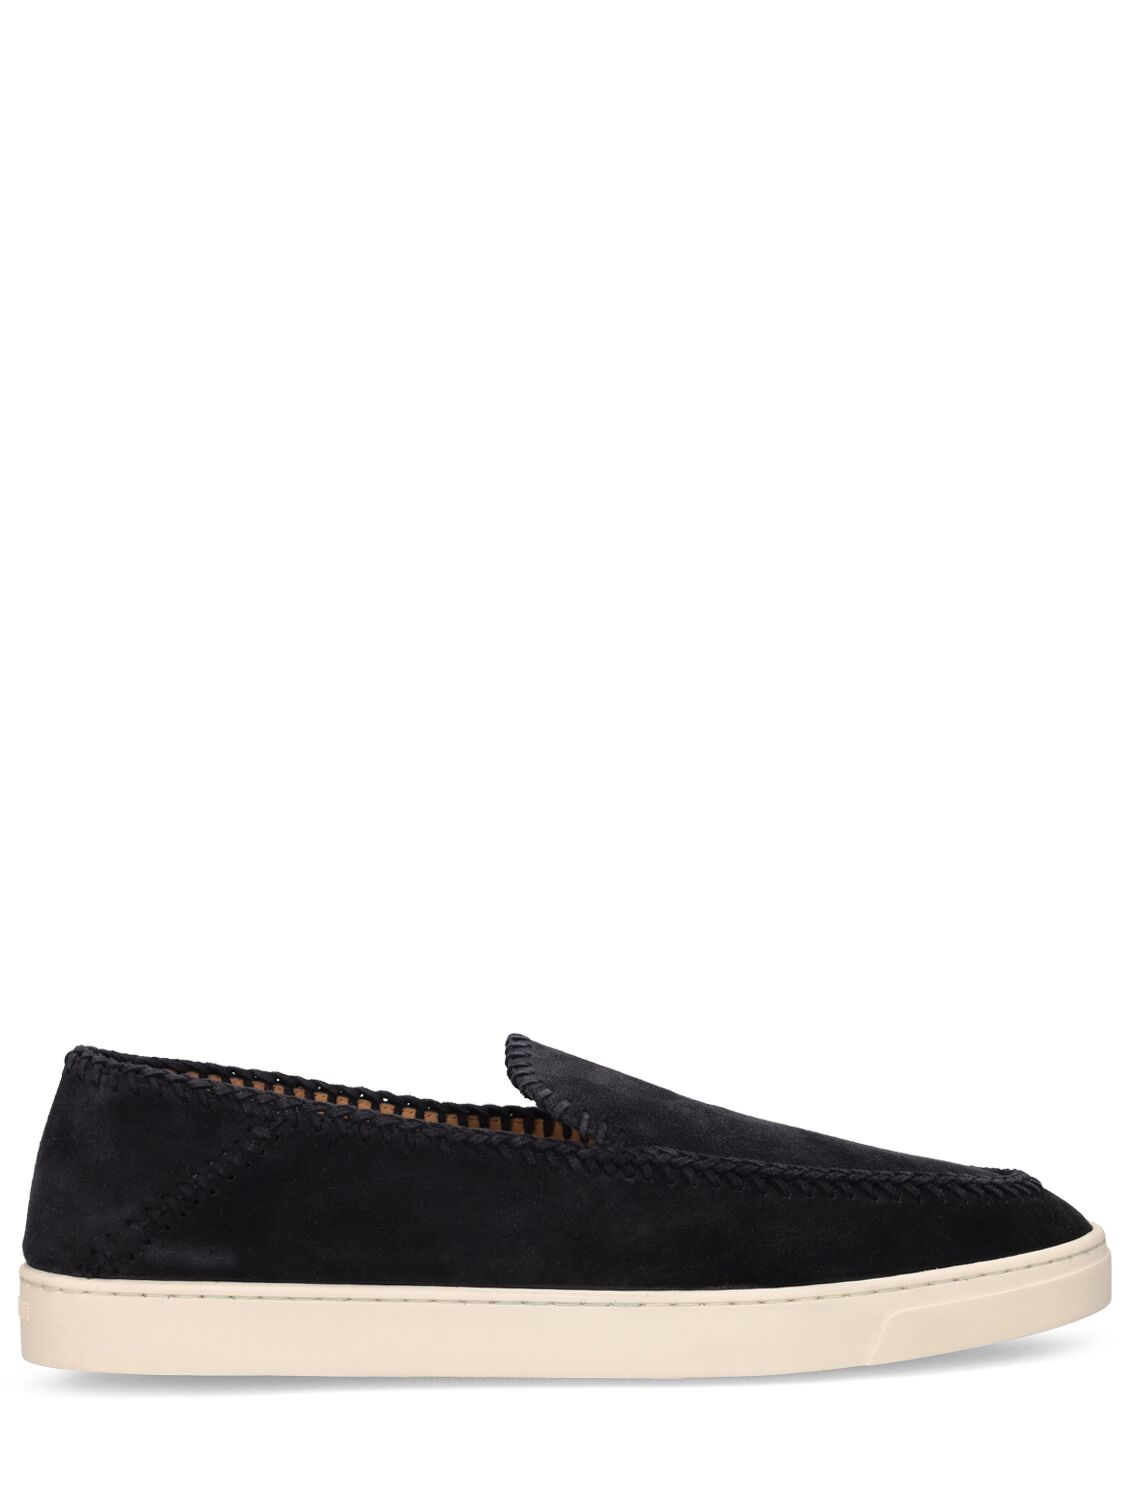 Image of Suede Slip-on Loafers